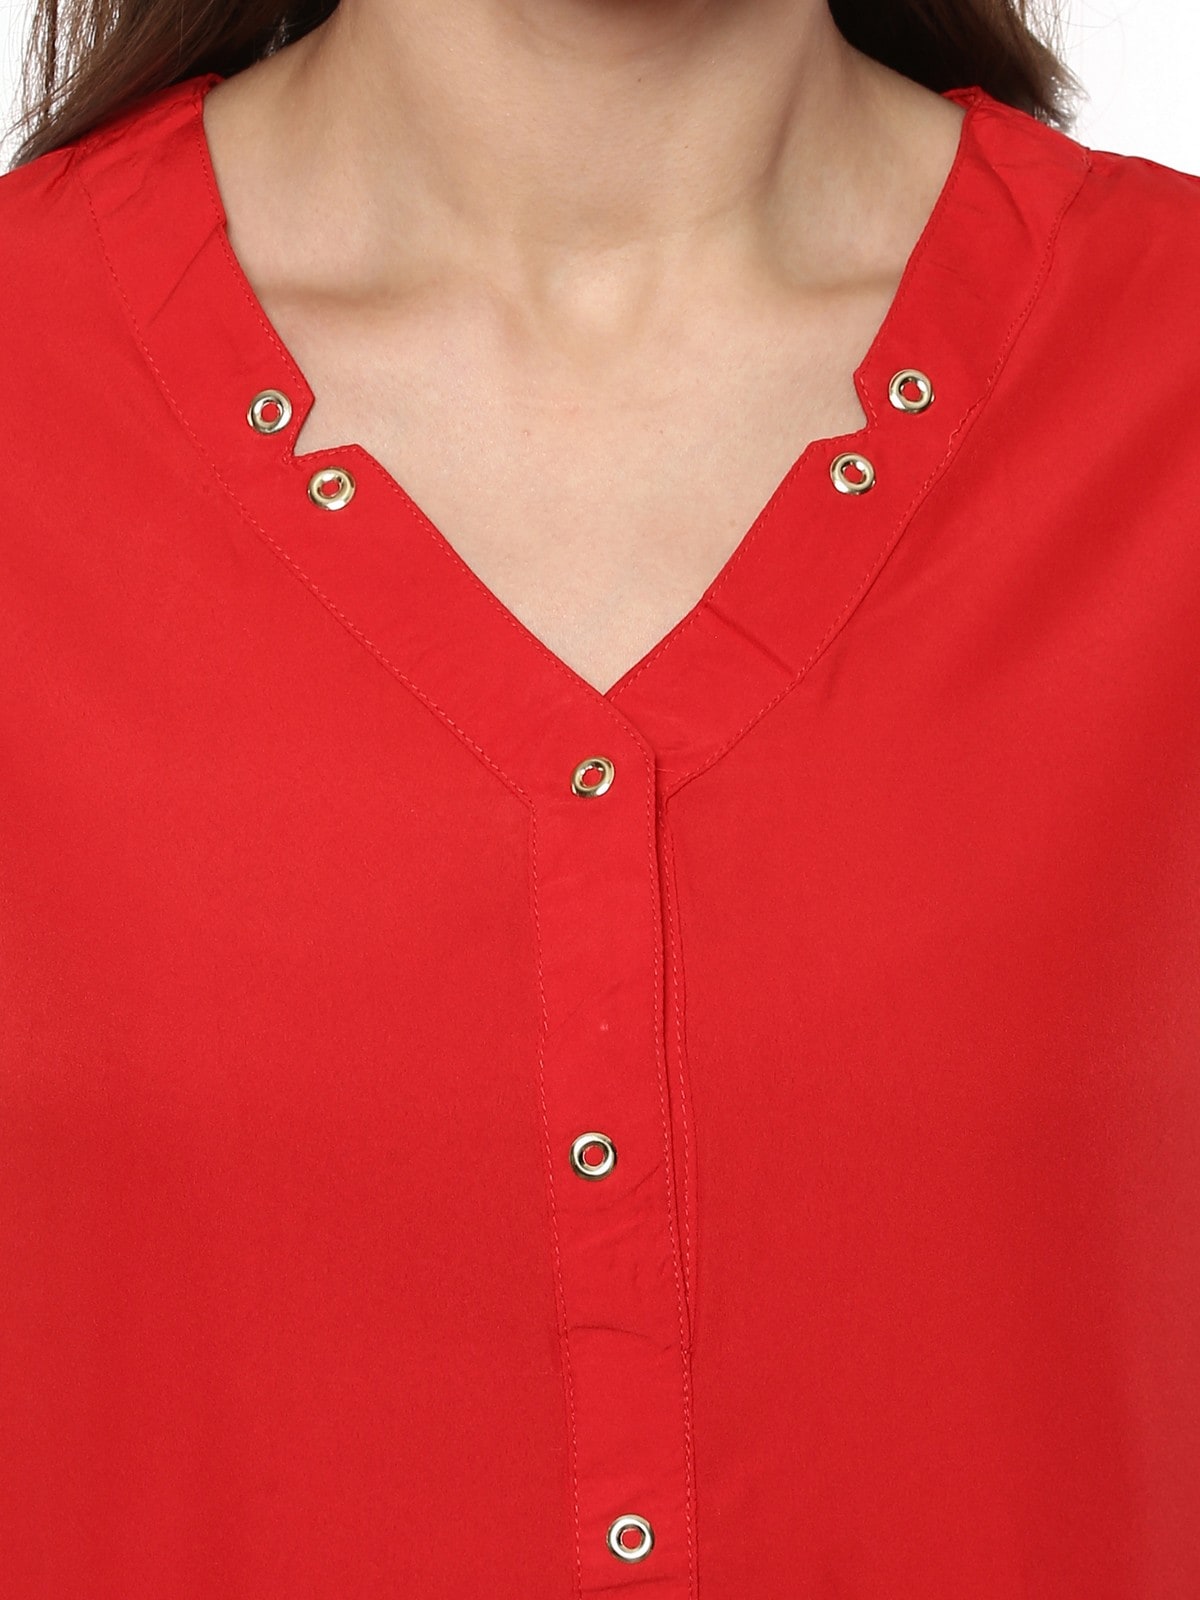 Red Shirt Top With Detailed Notch Designs